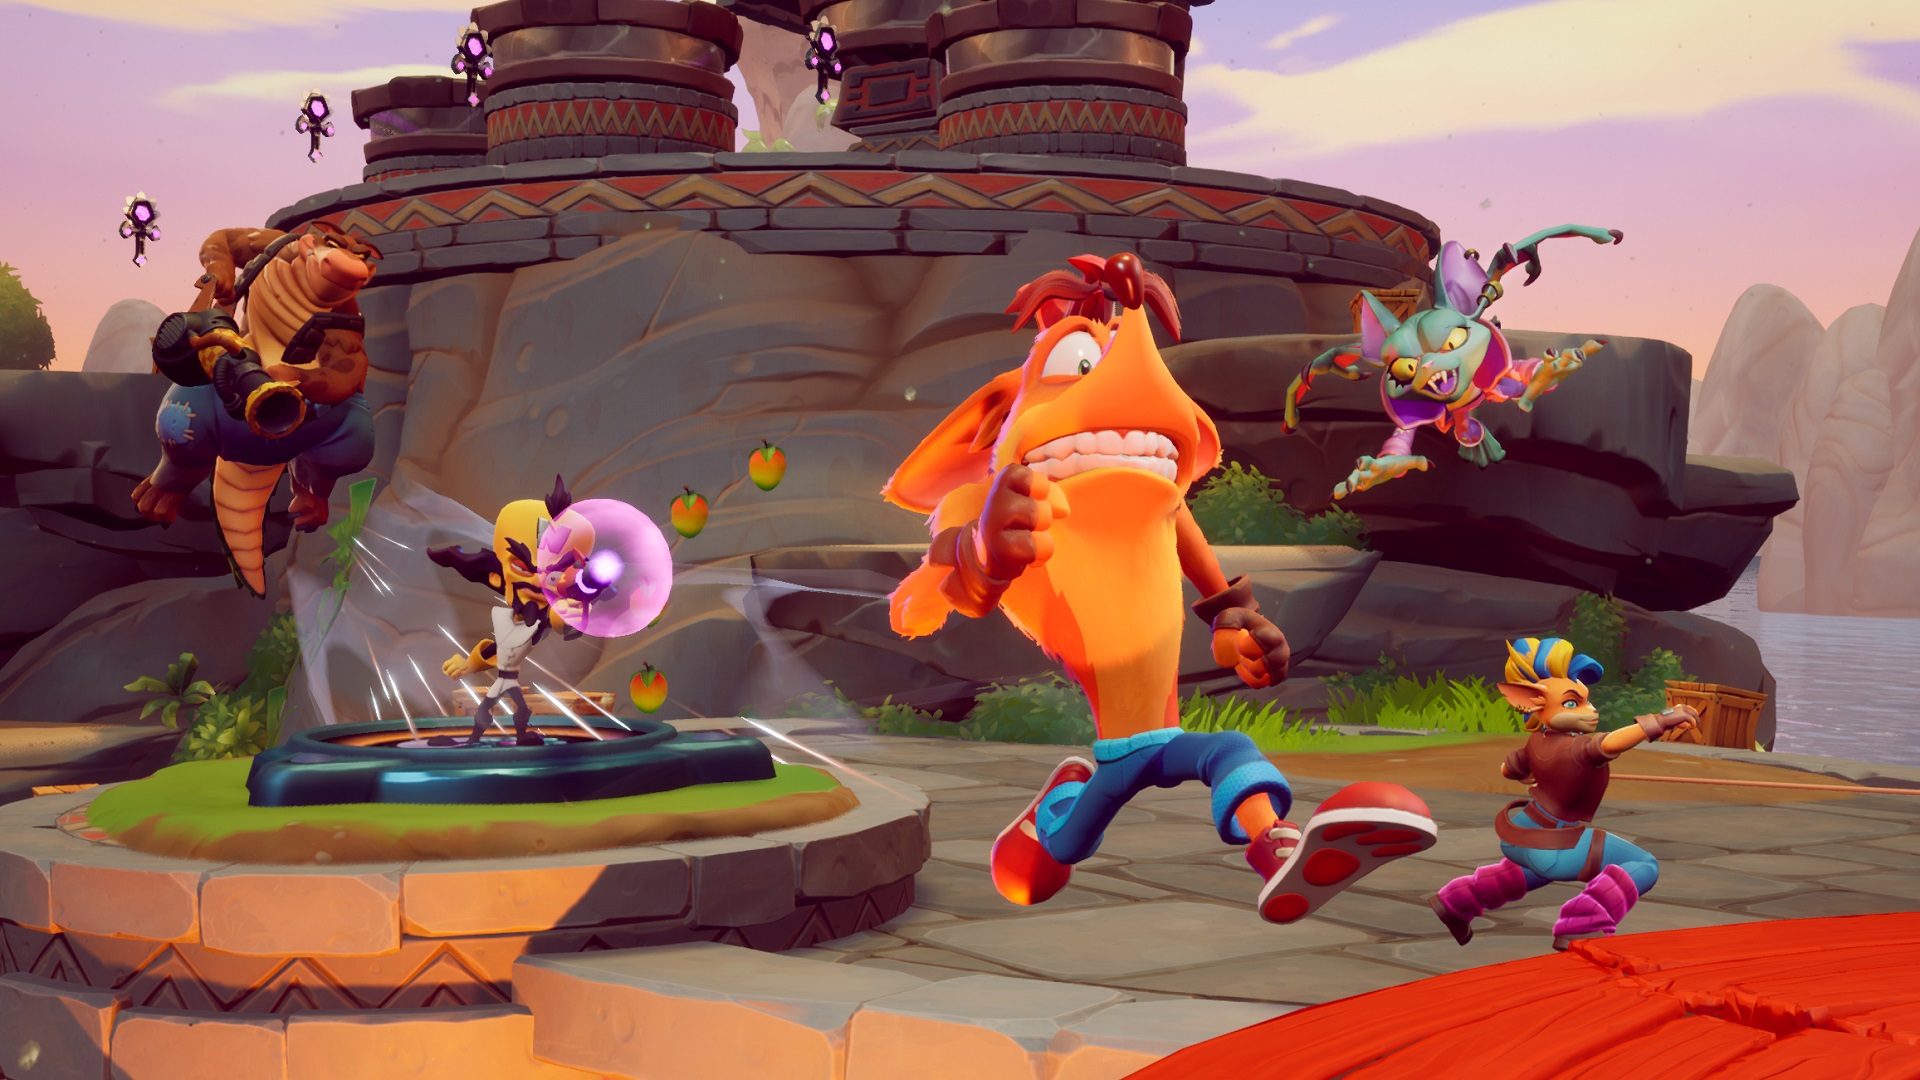 Activision wants to invest in new Crash Bandicoot games